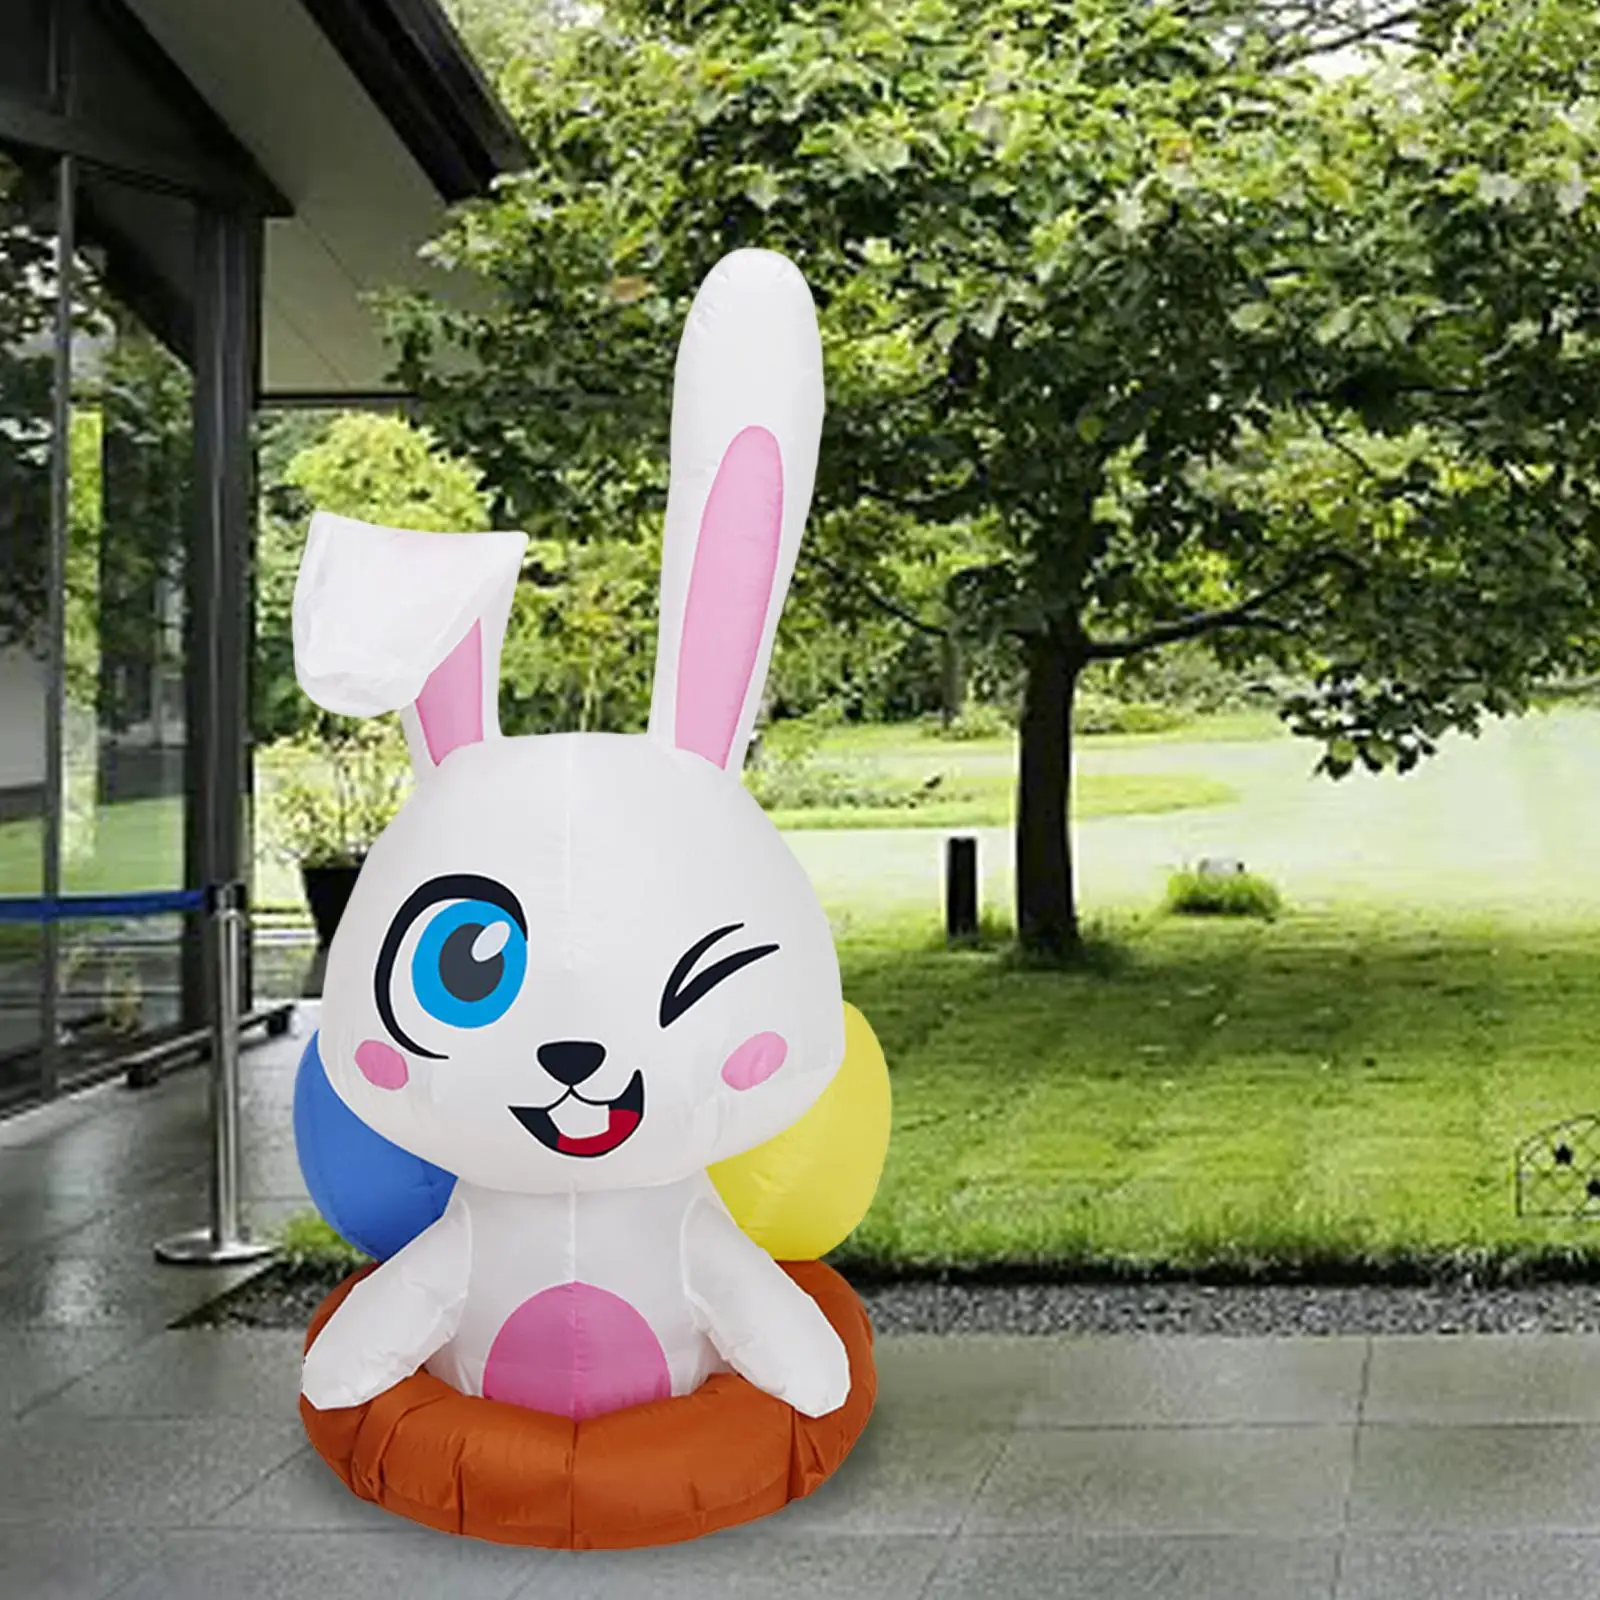 LED Light Easter Inflatable Decoration Rabbit Ornament for Home Lawn Yard Decoration